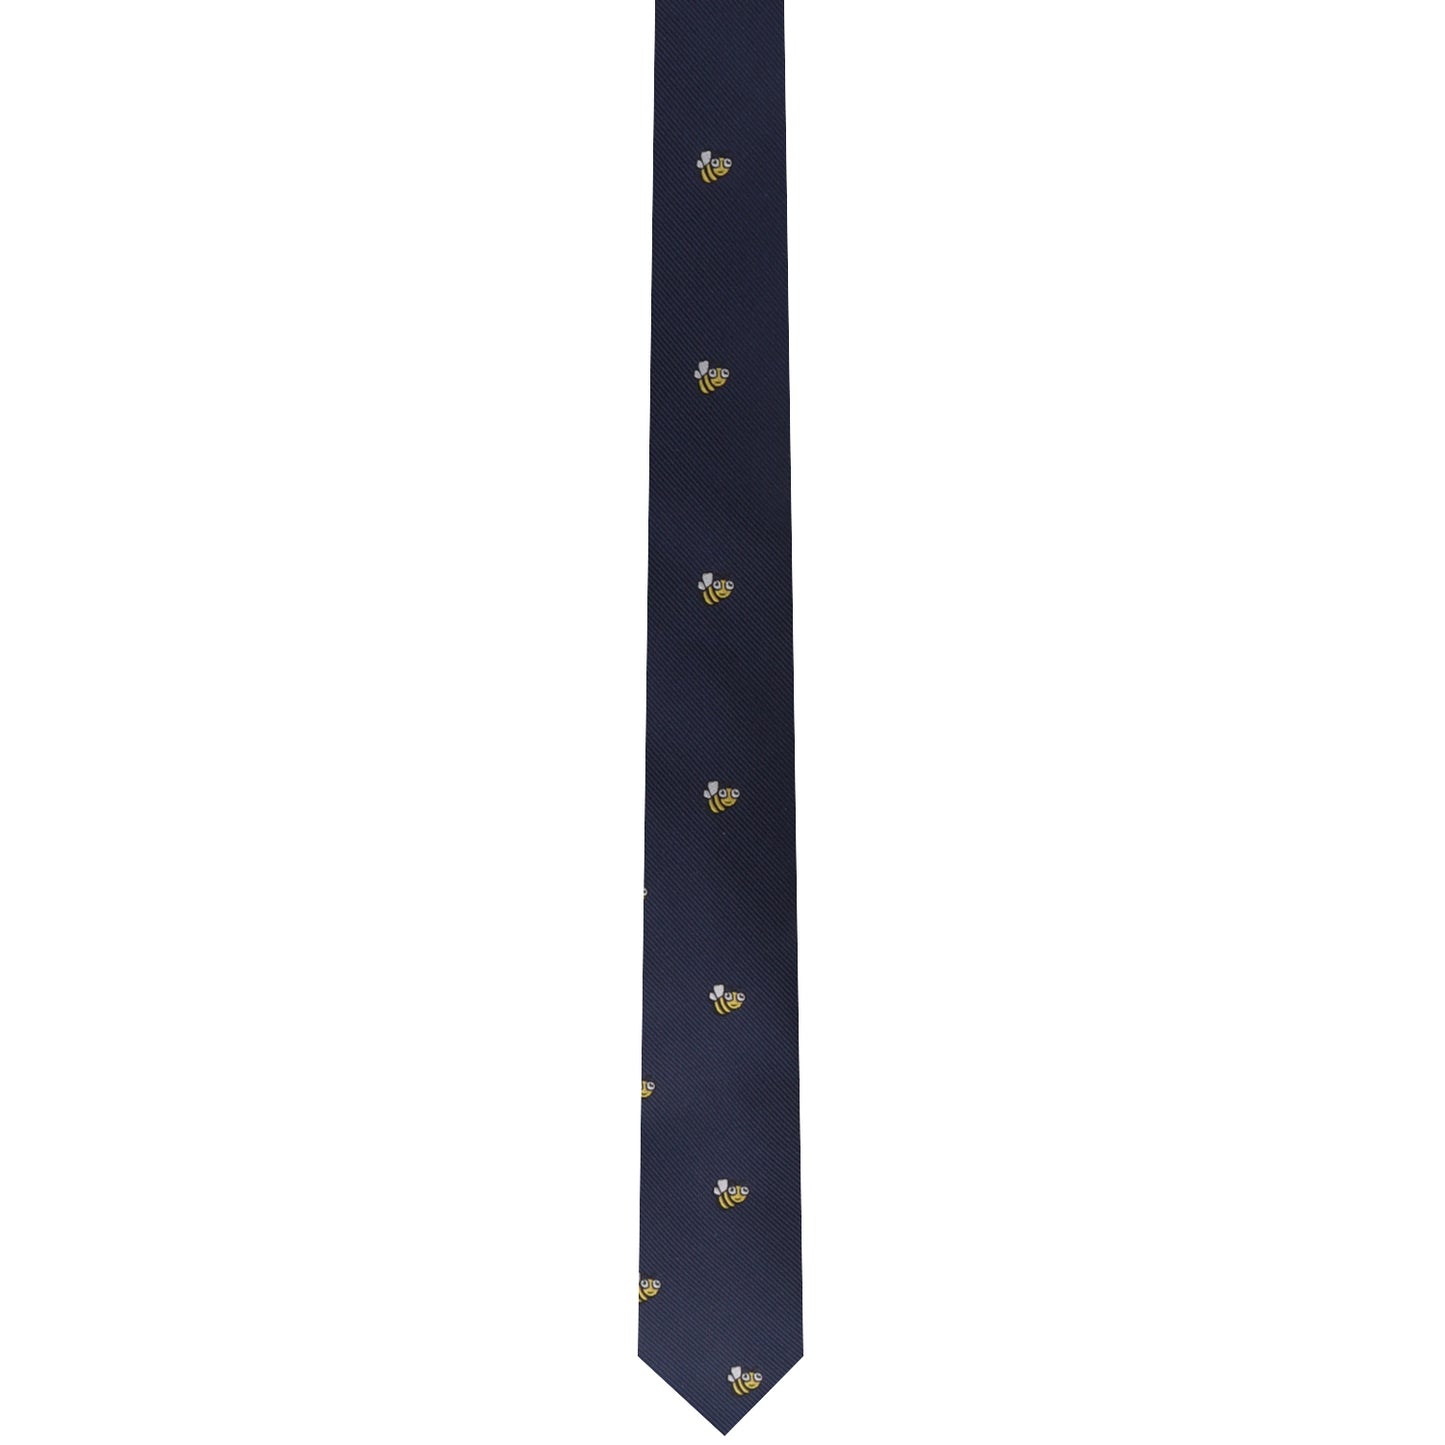 A stylish Bee Skinny Tie with gold eagles on it.